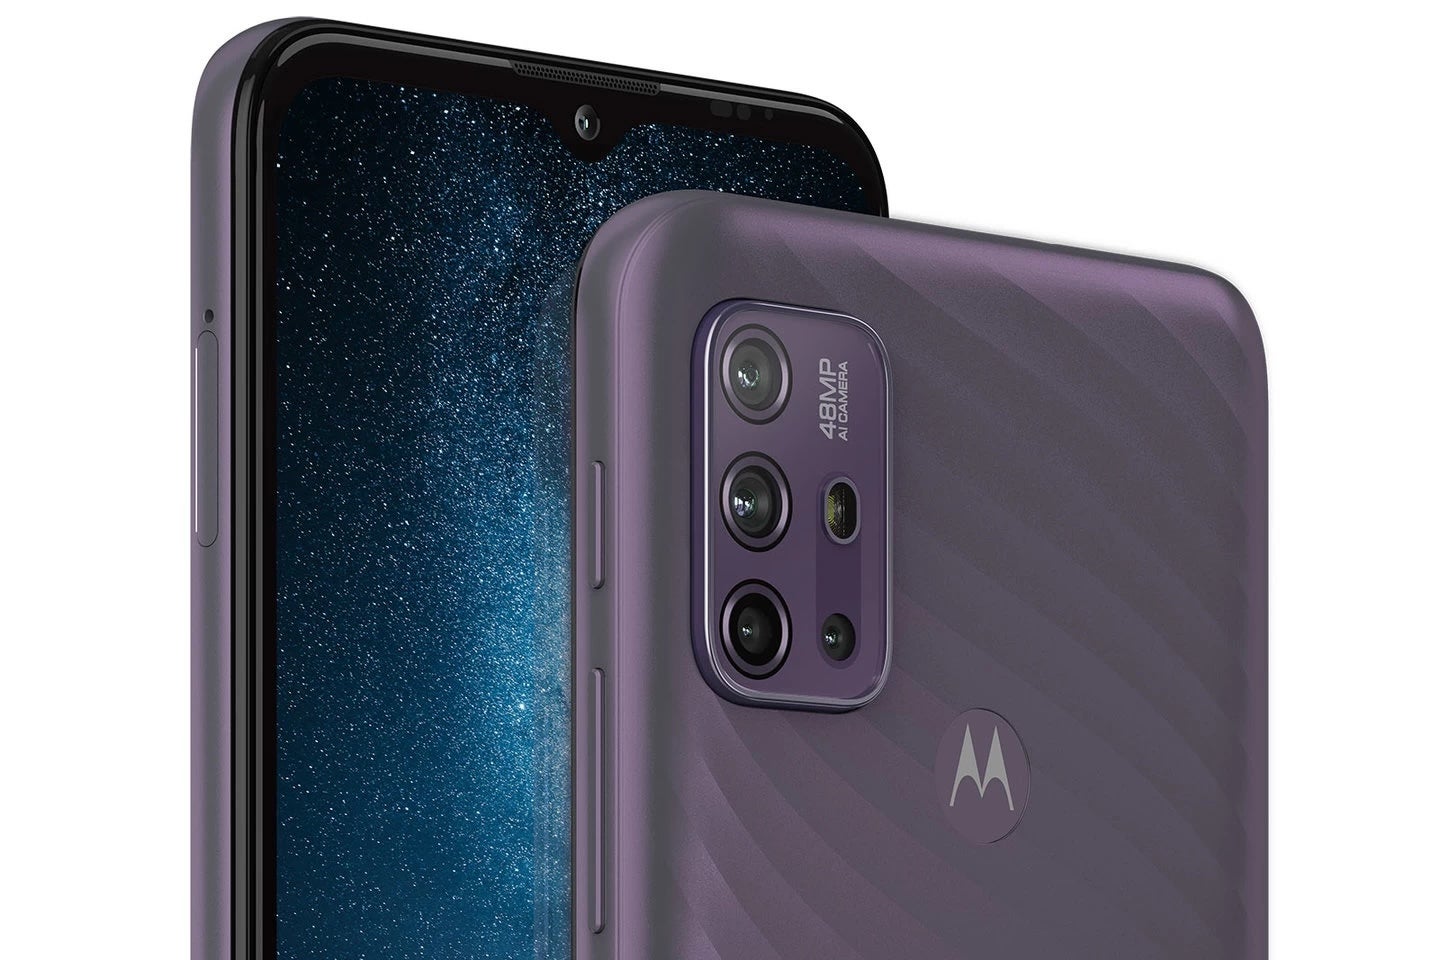 Motorola Moto G10 - Motorola has another affordable 5G smartphone in the pipeline